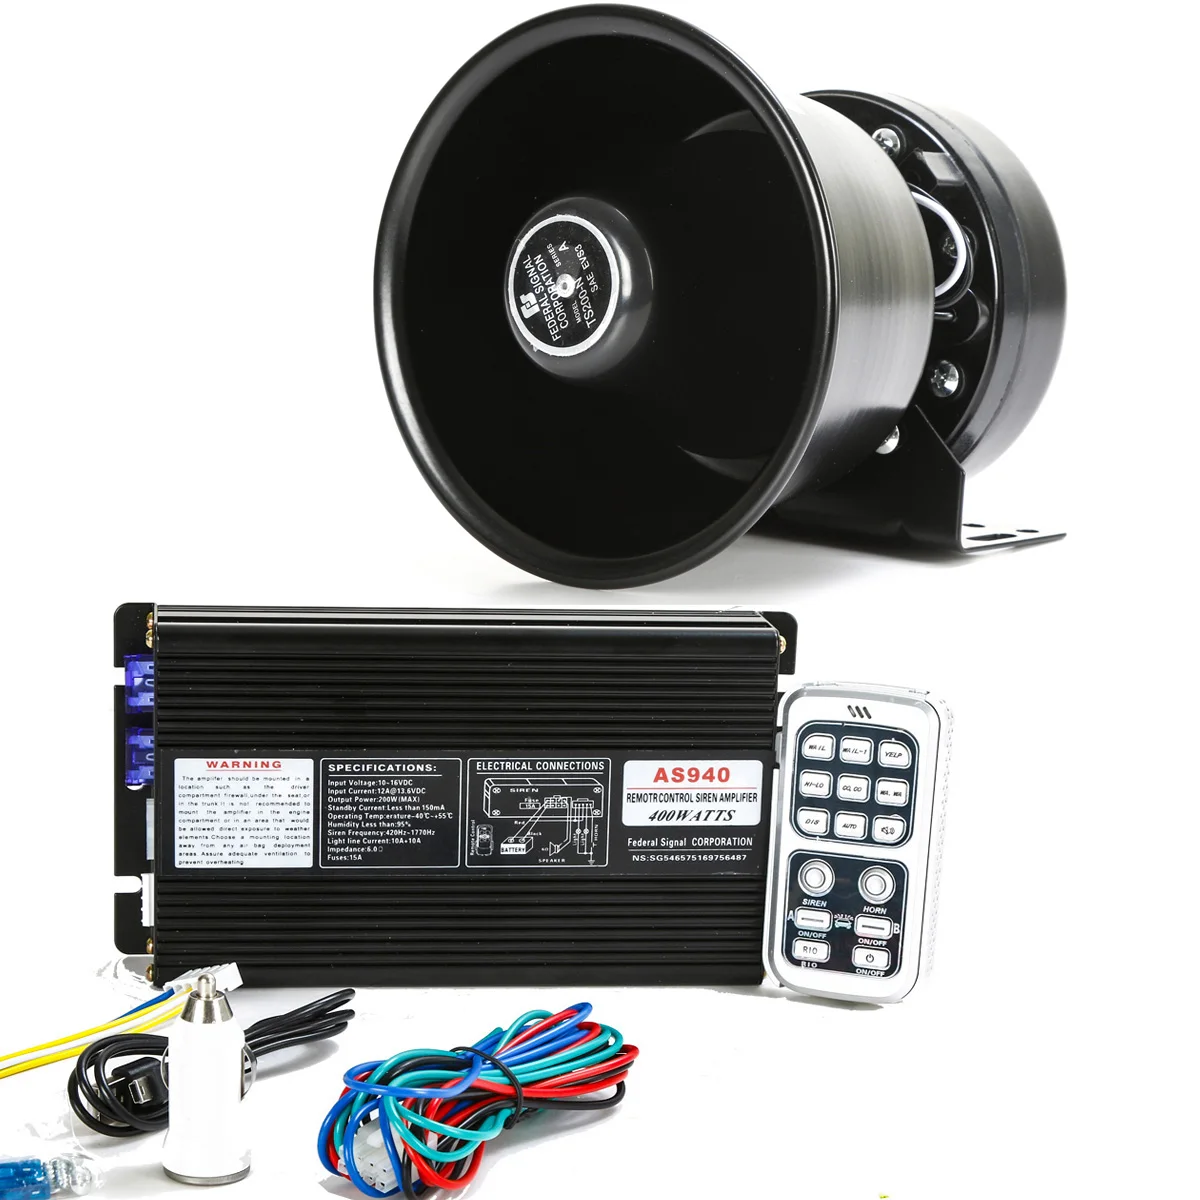 DC 12V 400W 18 Tone Car Police Siren Horn PA Speaker with MIC System   Wireless Remote Control AS940 Car Siren Horn 12V AliExpress